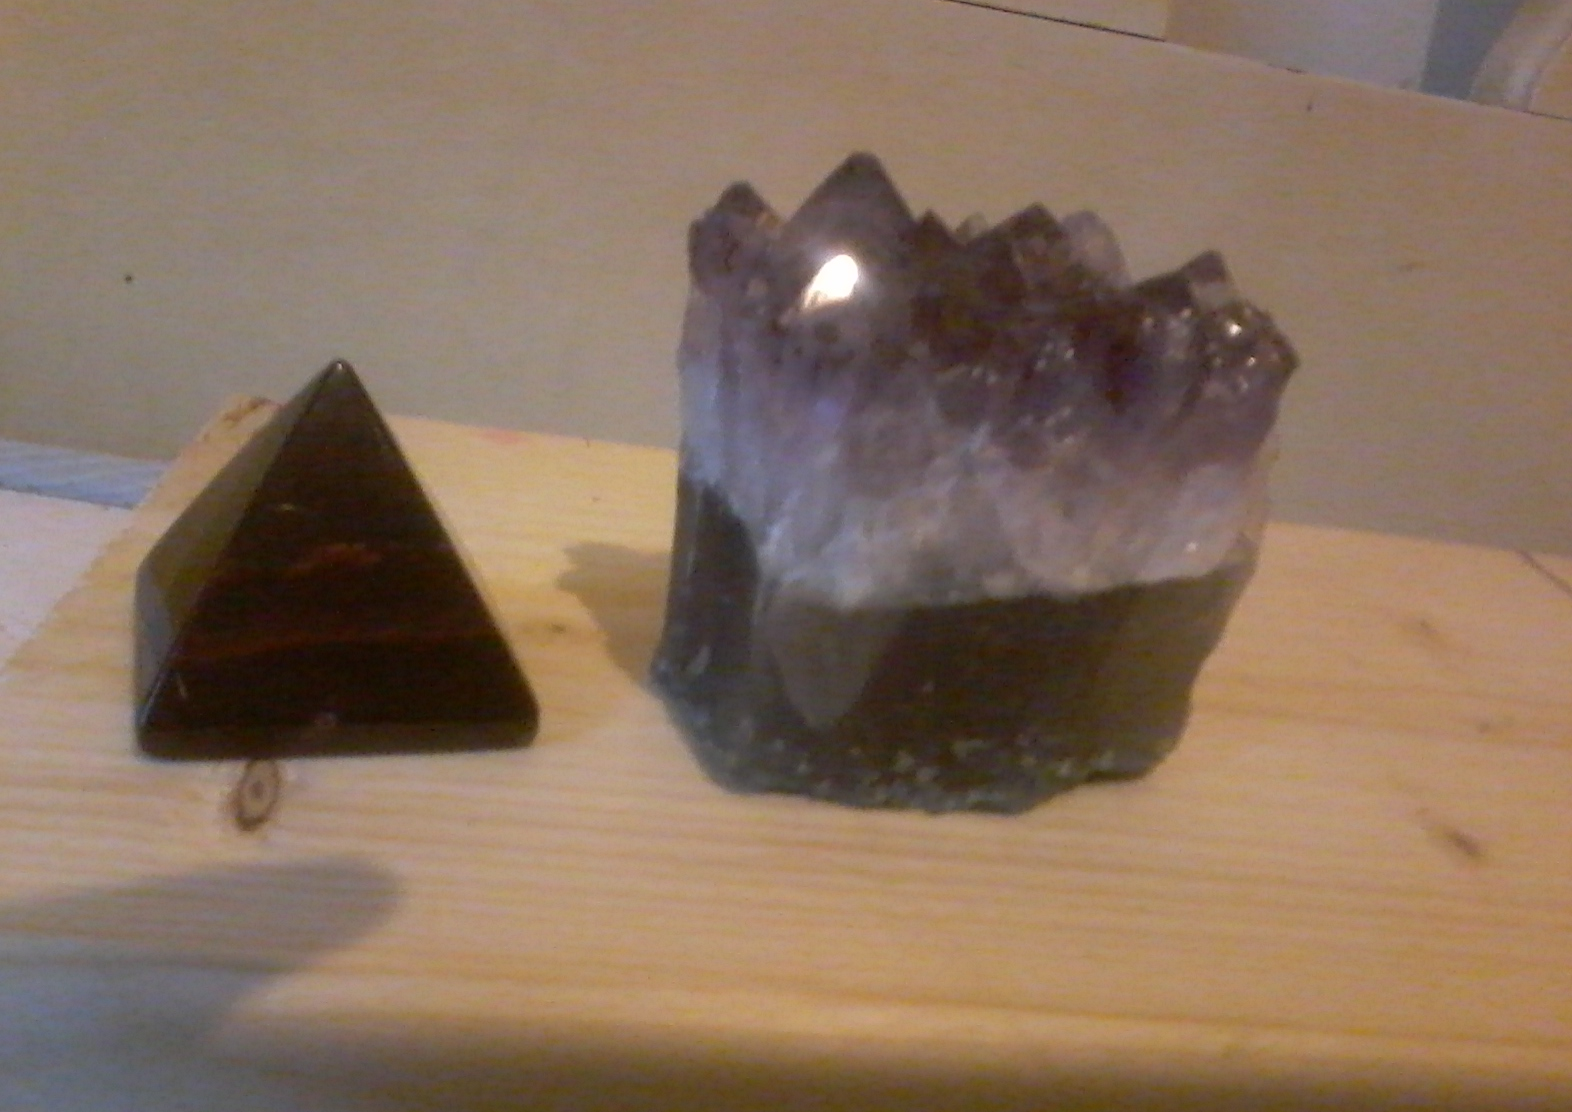 Pyramid and geode